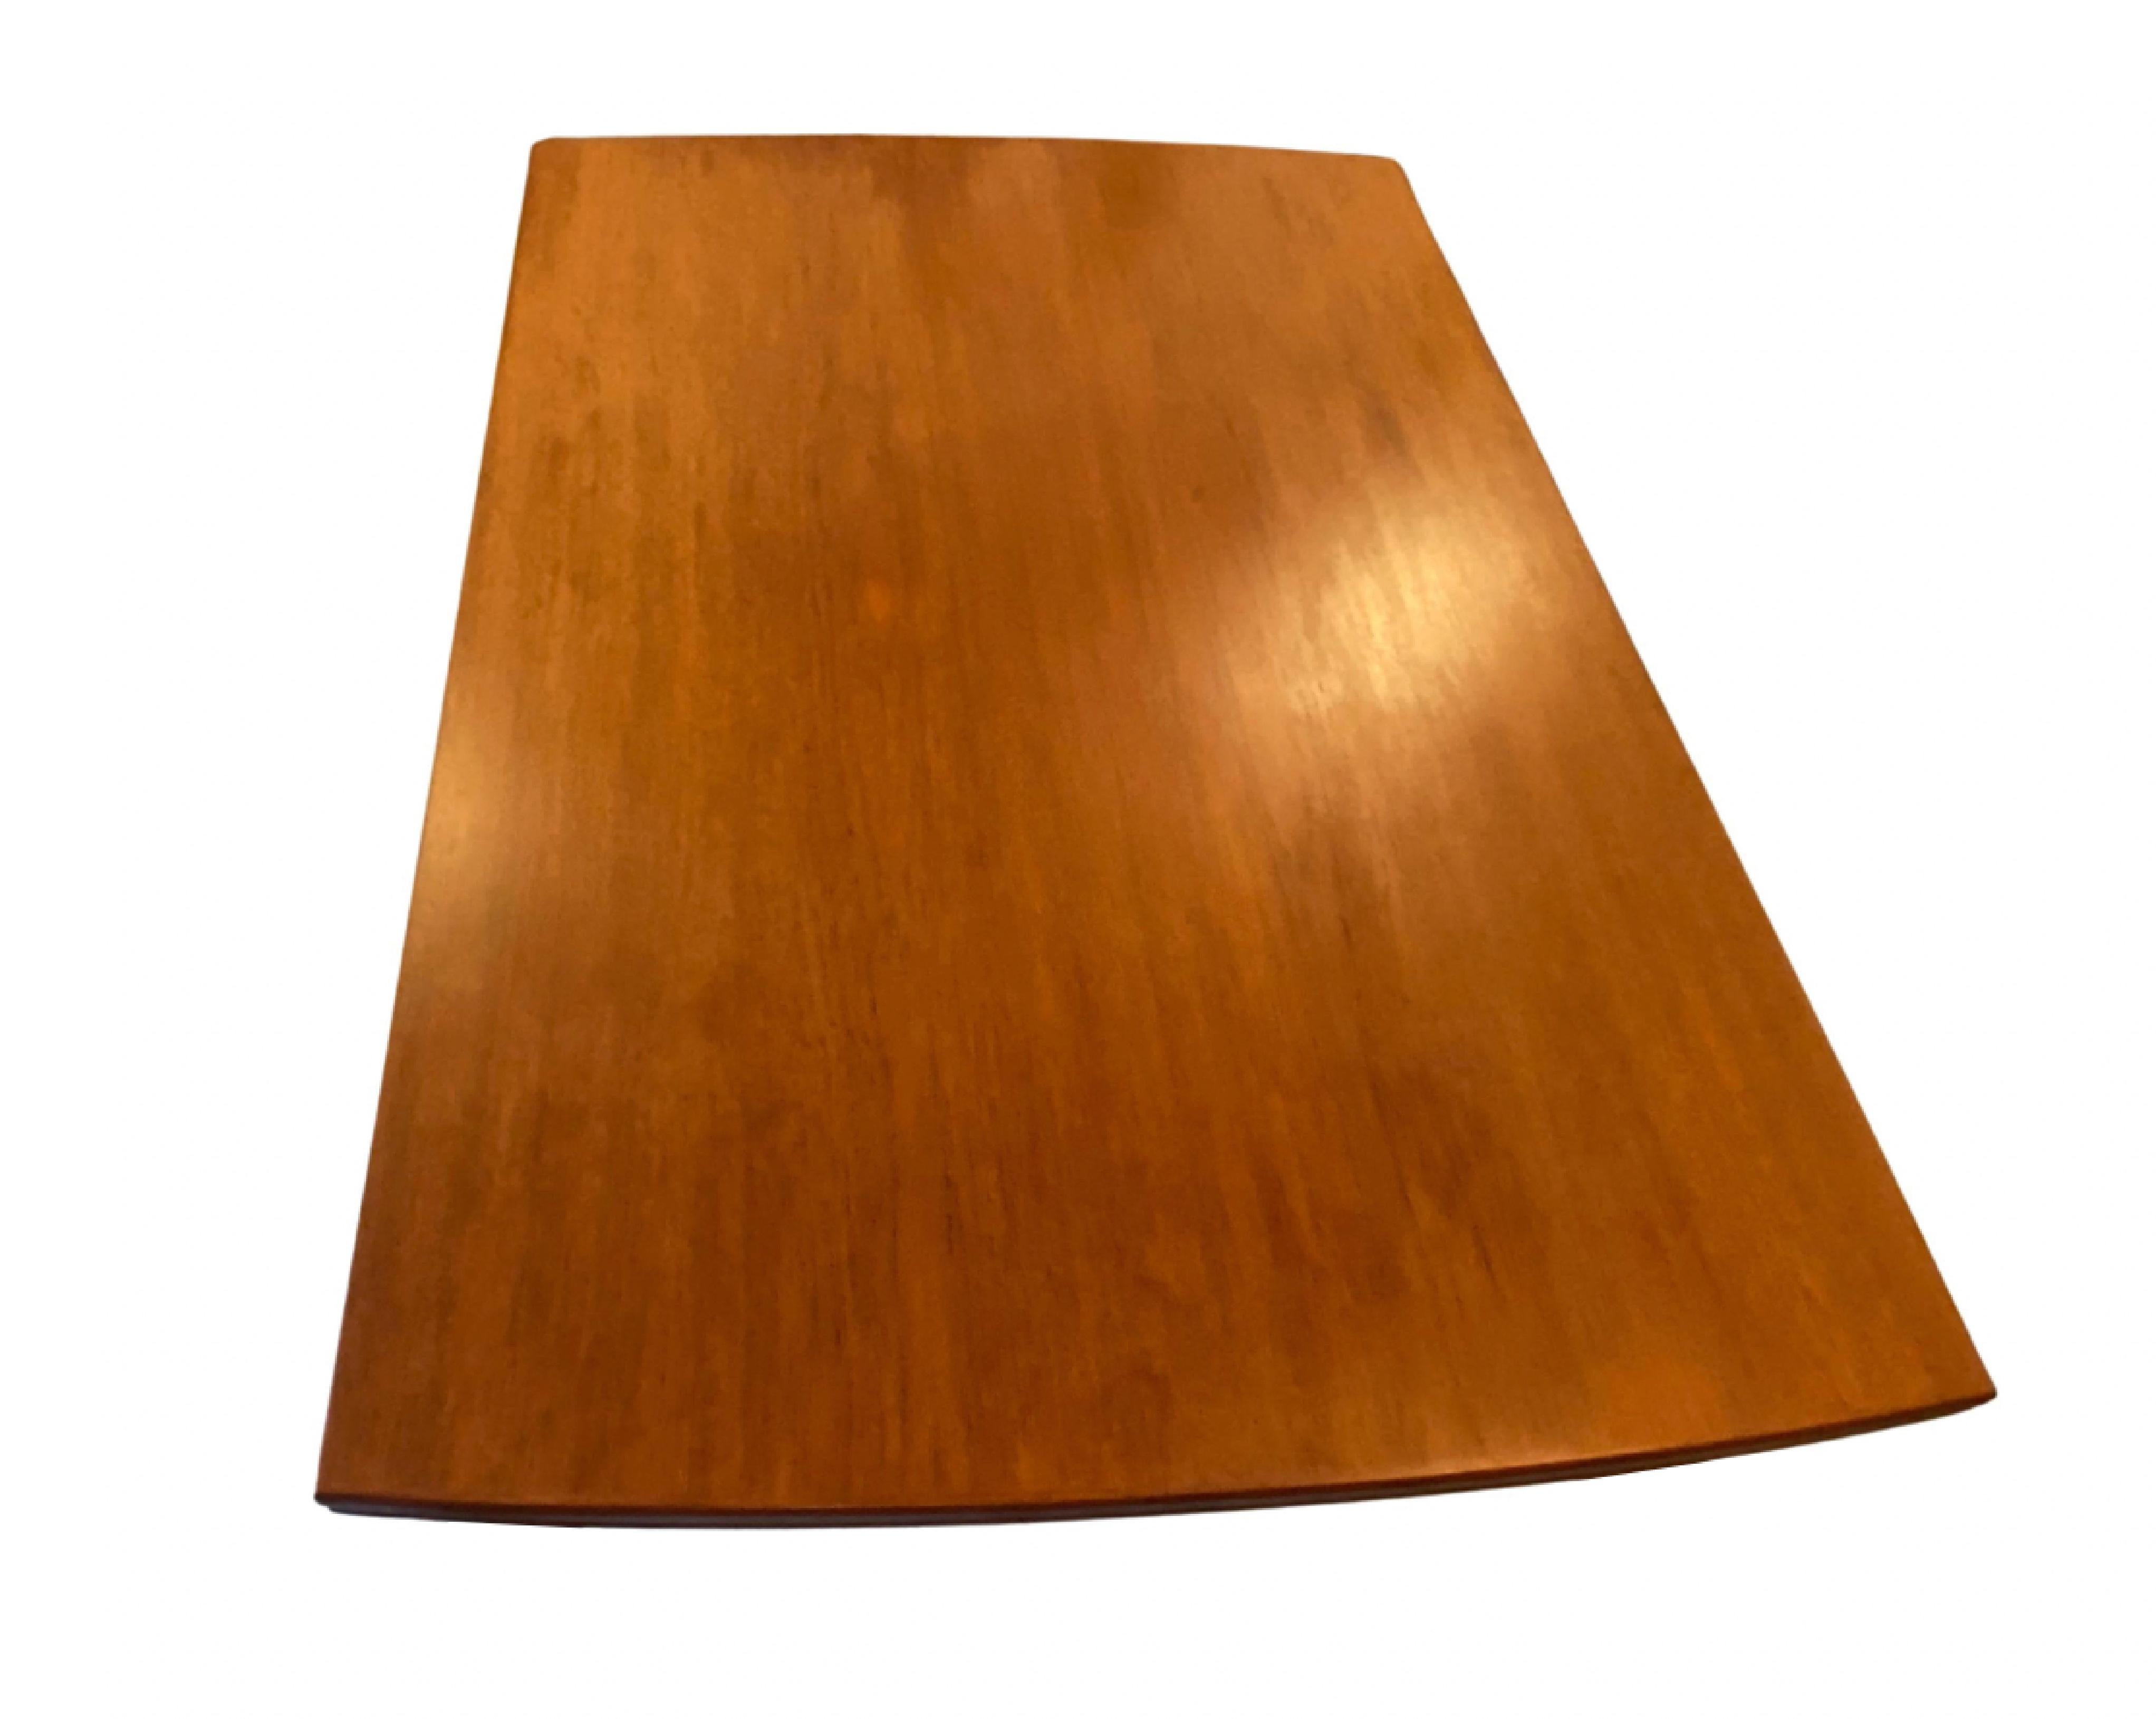 20th Century Classic Danish Mid-Century Dining Table in Teak with Extensions